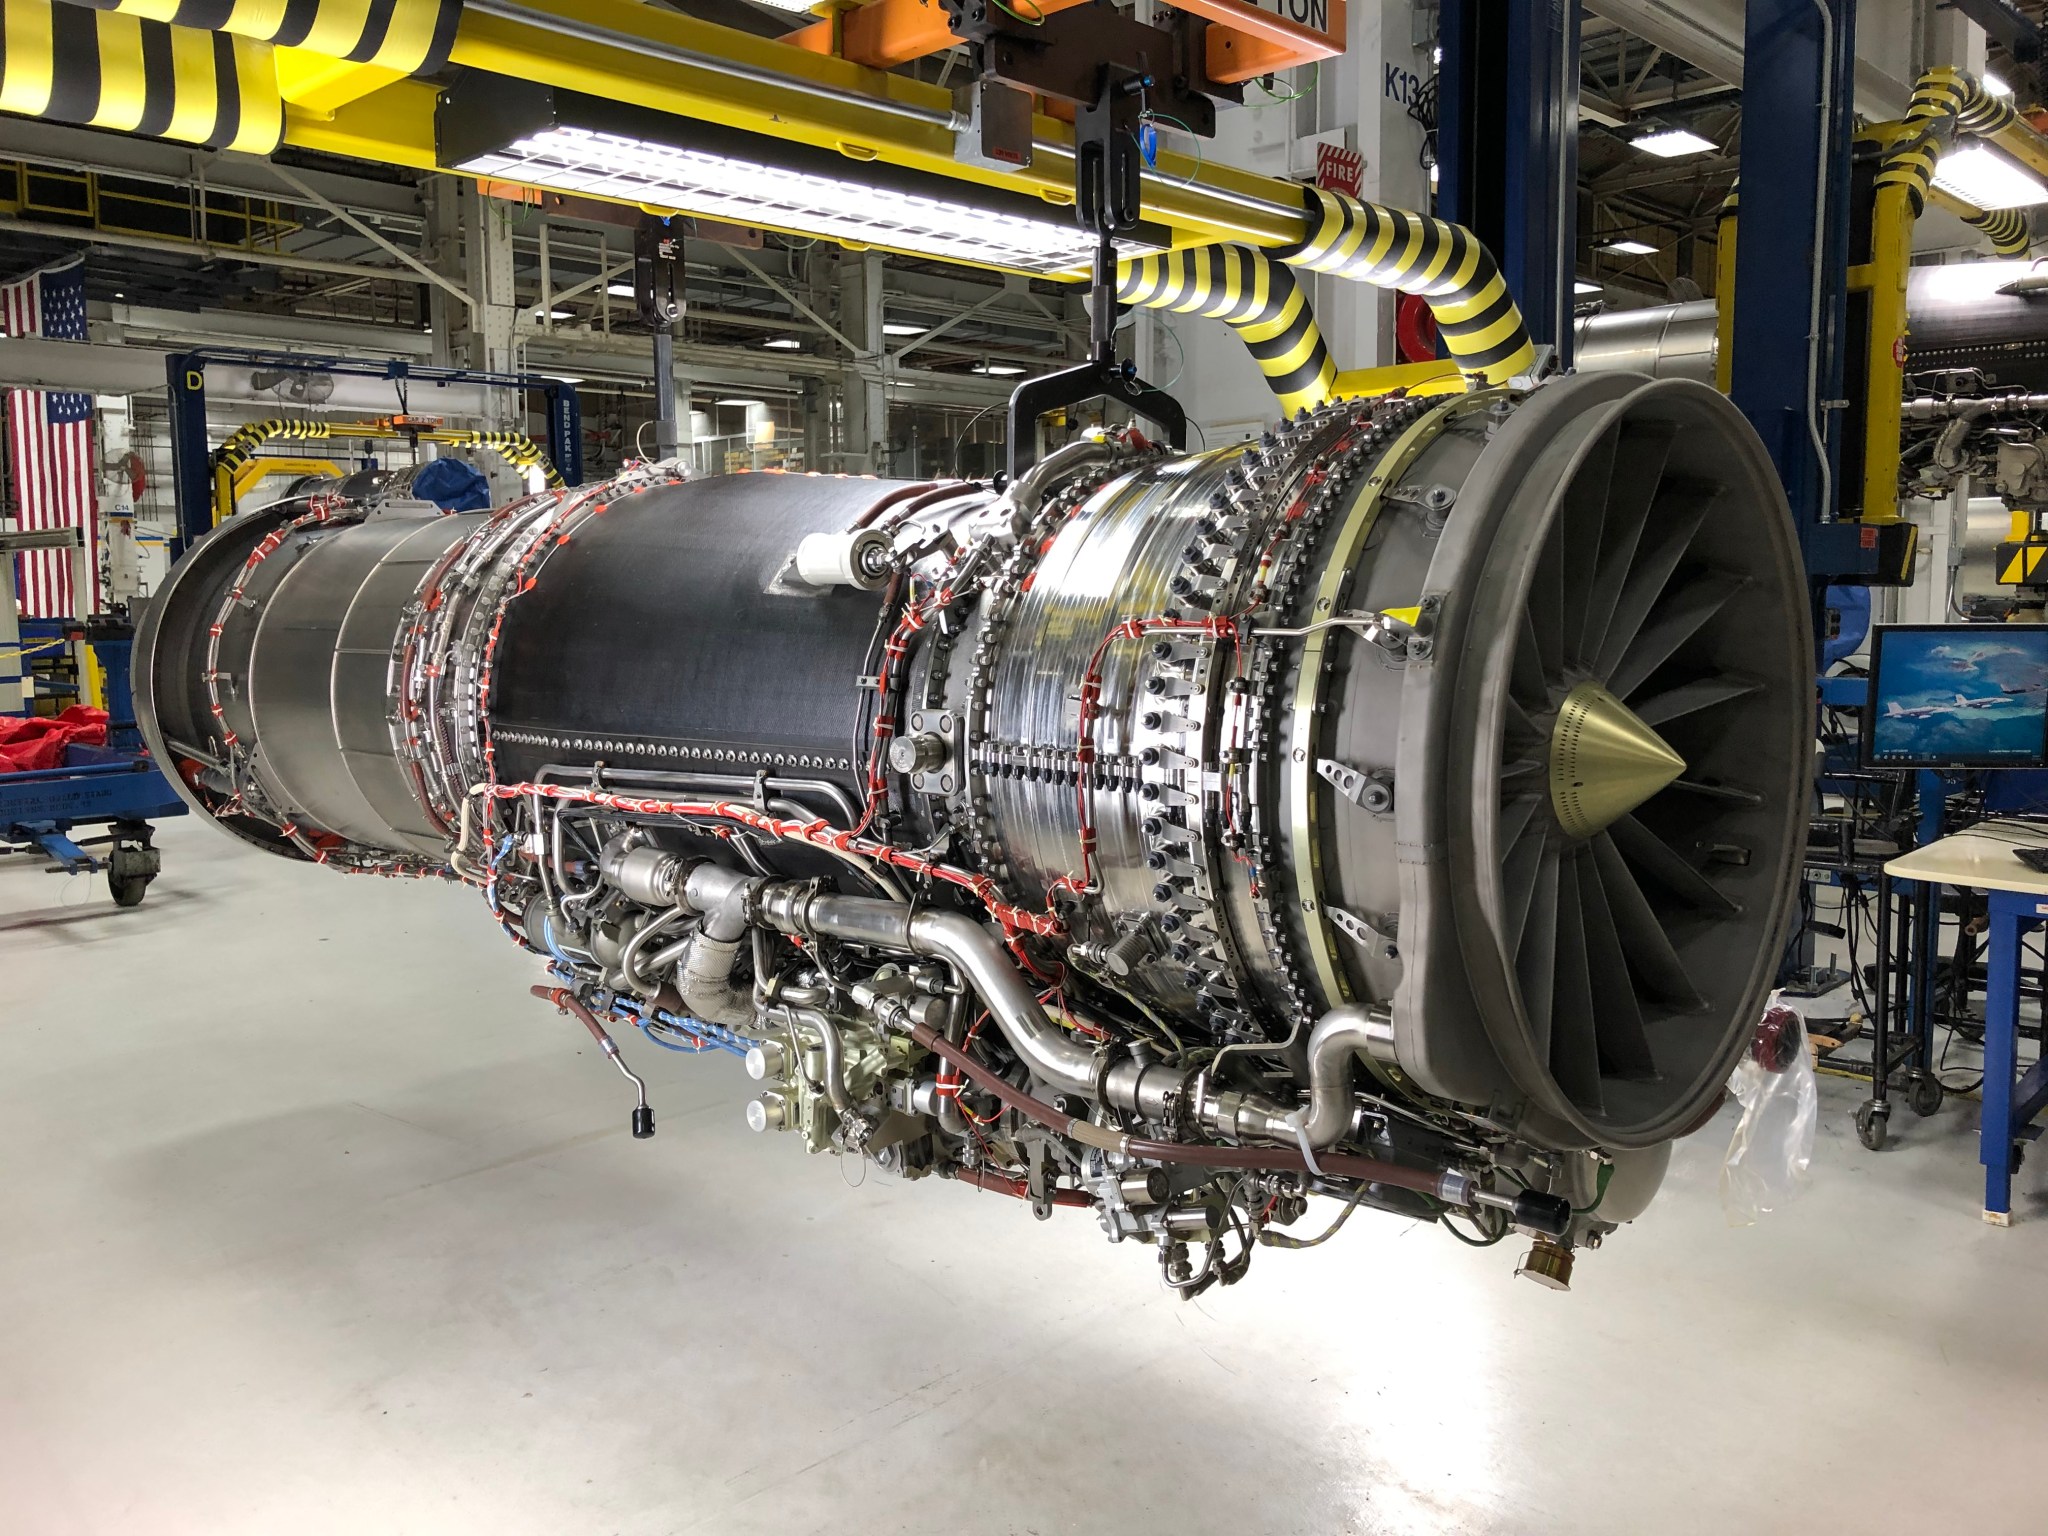 The F414-GE-100 engine sits in the assembly area at GE Aviation’s Riverworks facility.